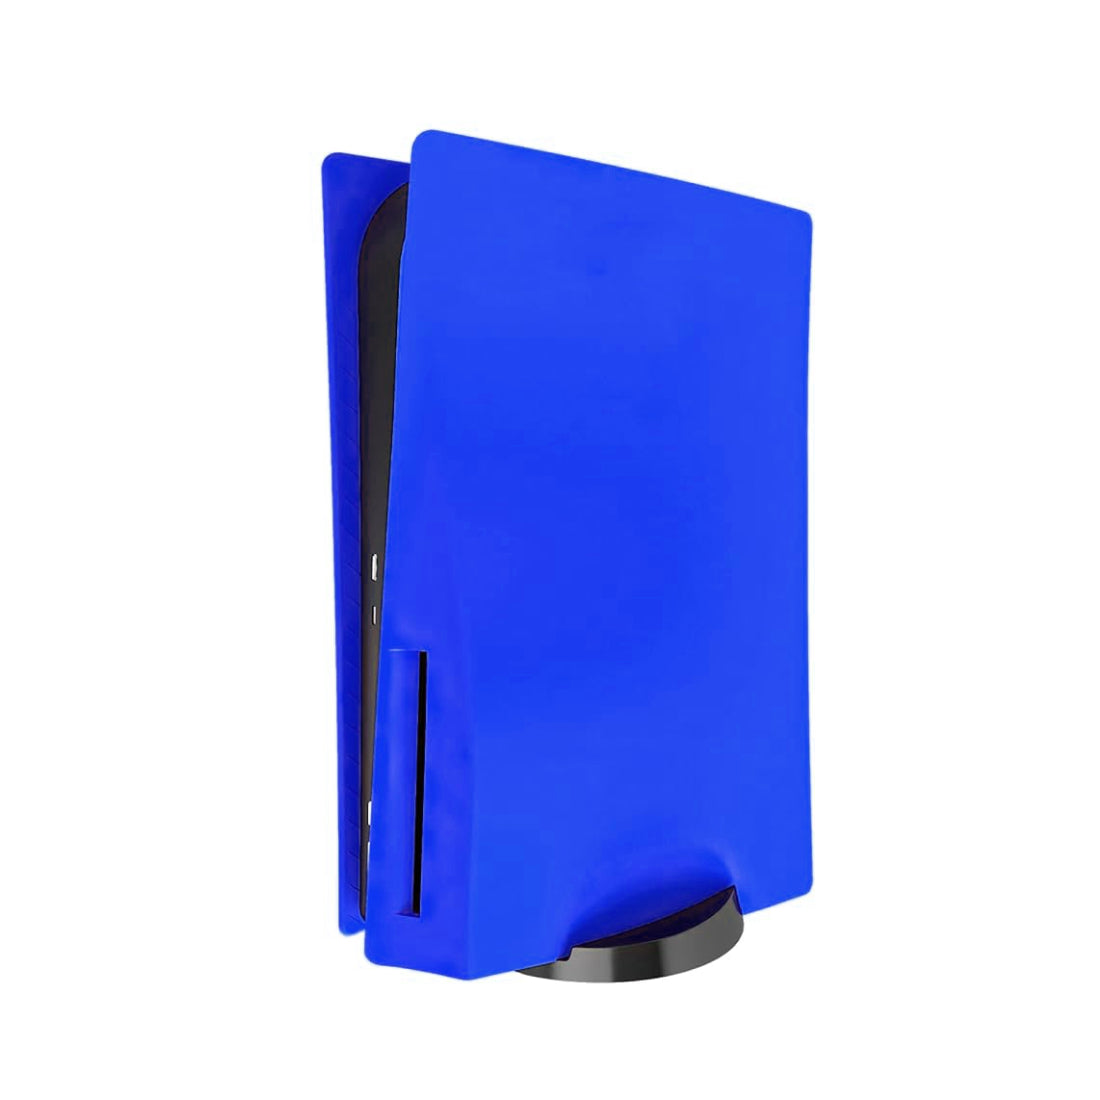 Faceplate Standard Plastic Cover For Playstation 5 - Disc Edition - Blue - أكسسوار